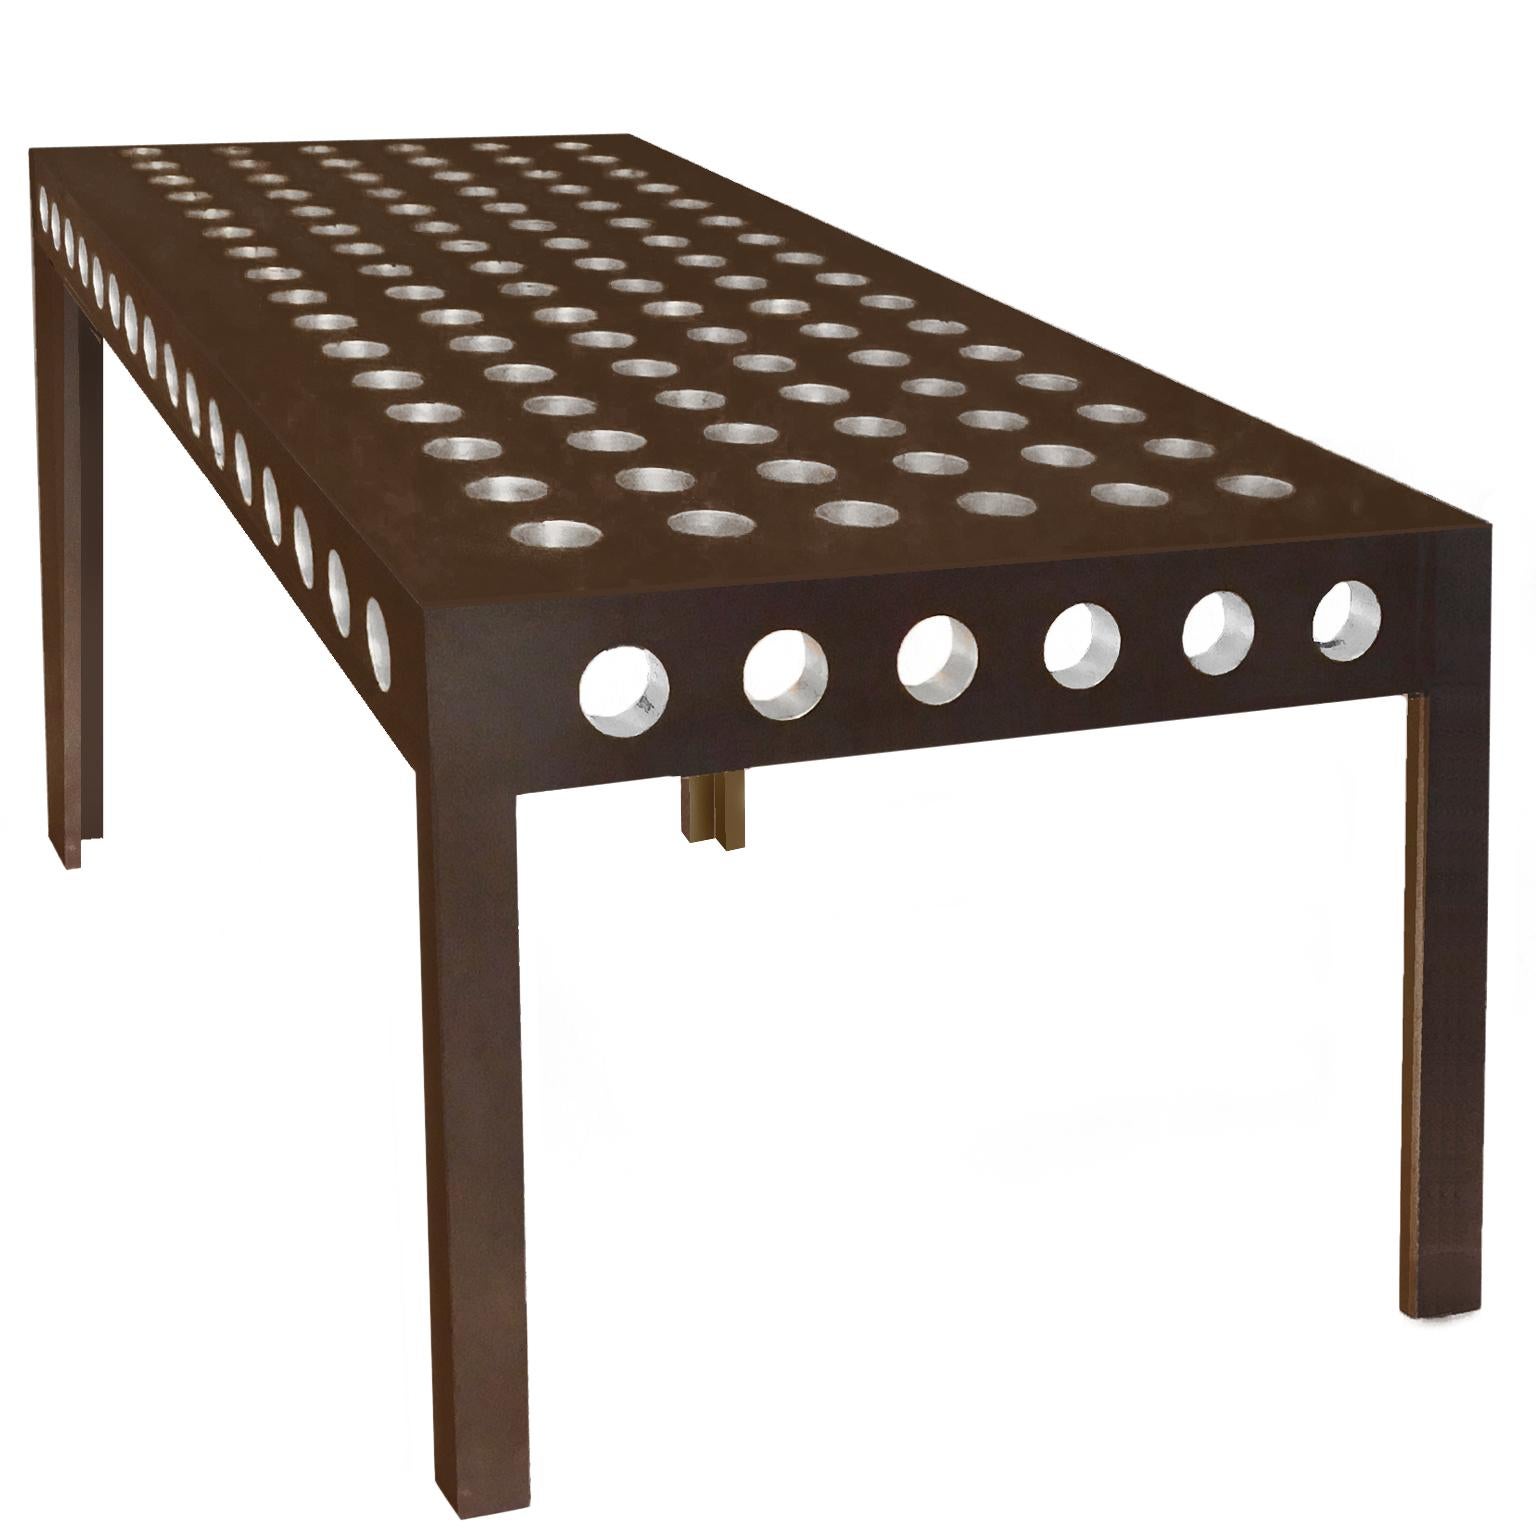 Contemporary Steel Table with with applied gold or silver leaf in holes For Sale